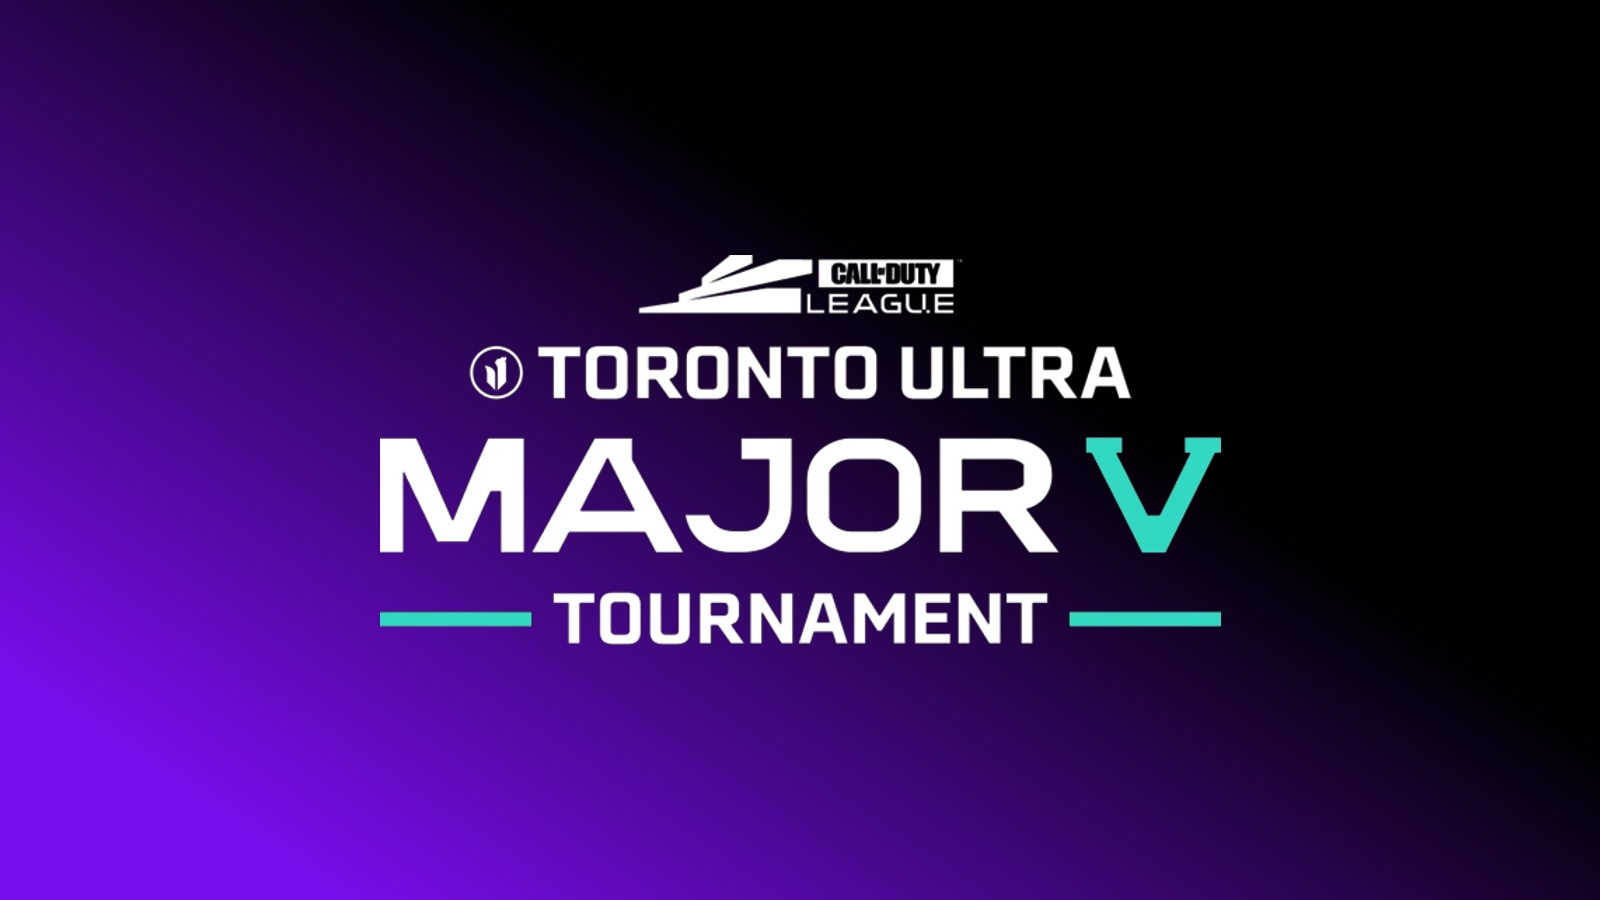 How to watch CDL Major 5: Schedule, Champs qualification & more – Egaxo